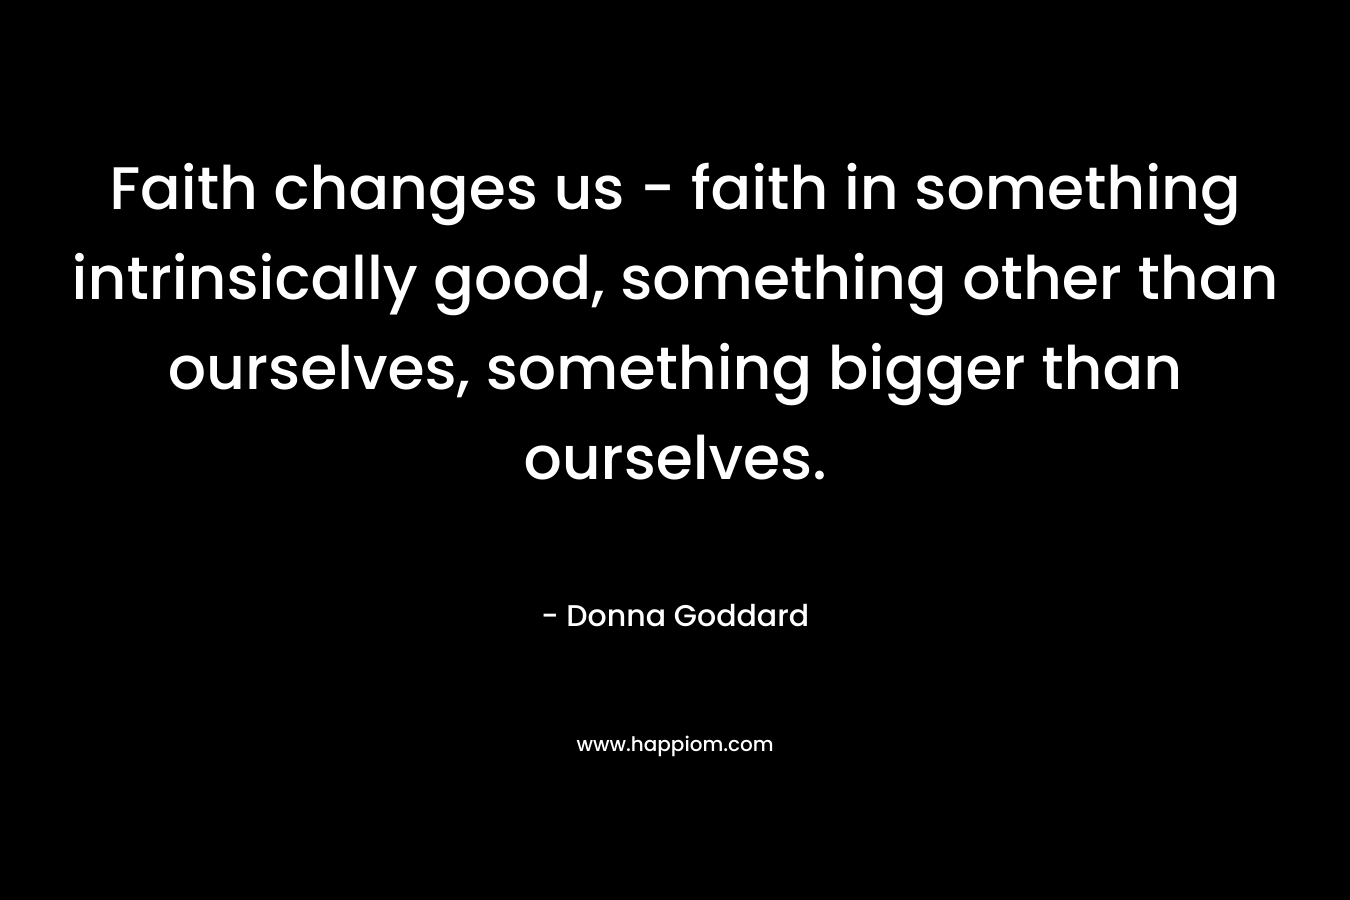 Faith changes us - faith in something intrinsically good, something other than ourselves, something bigger than ourselves.